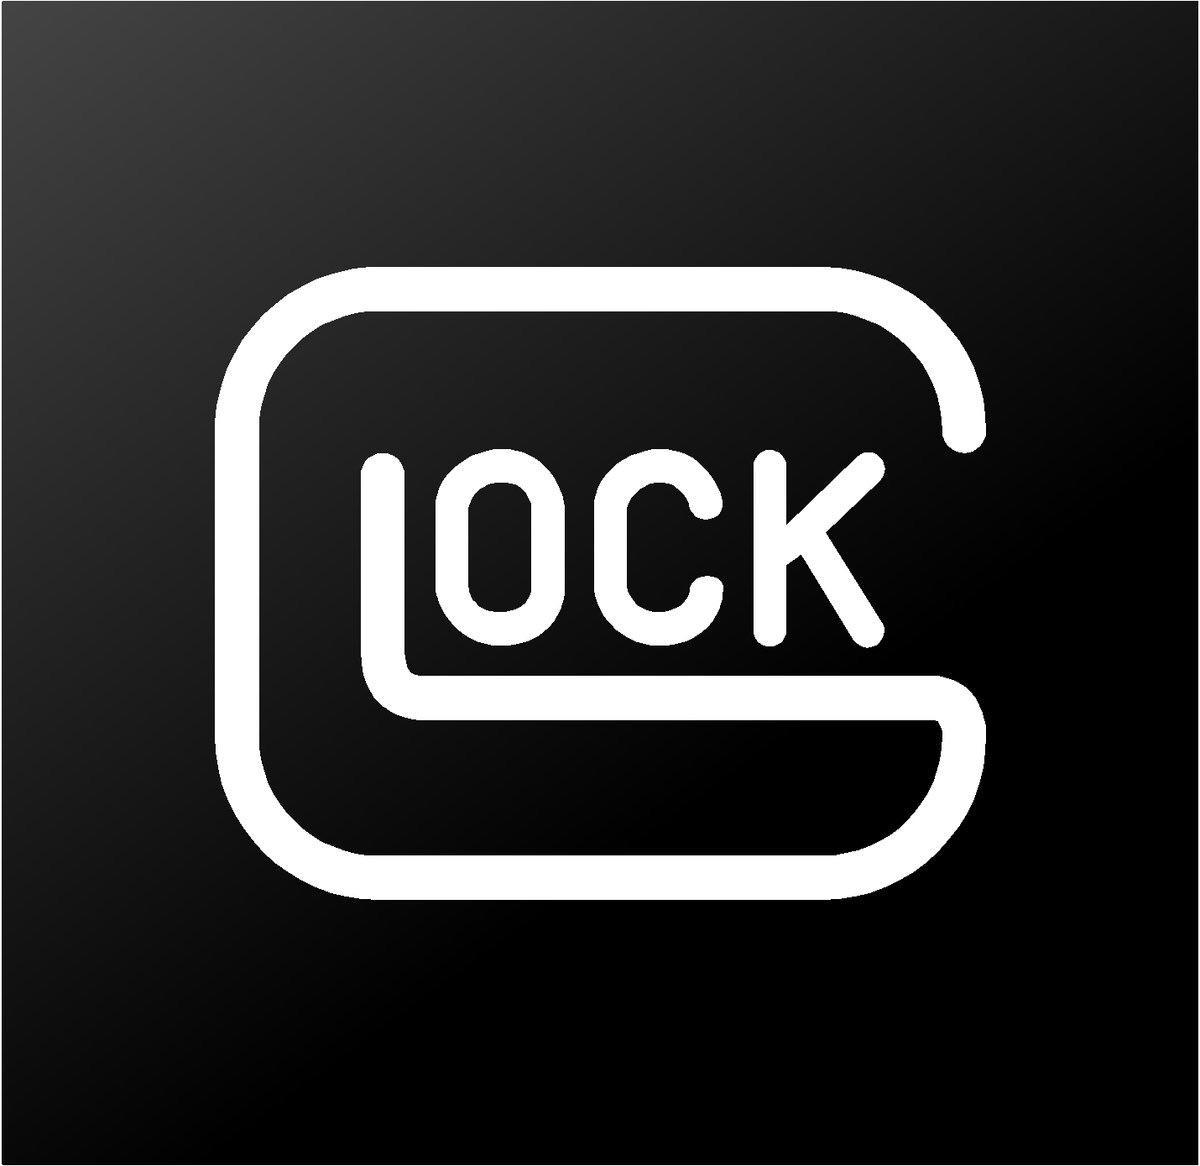 Team Glock Logo - Can we have some appreciation for the glock logo